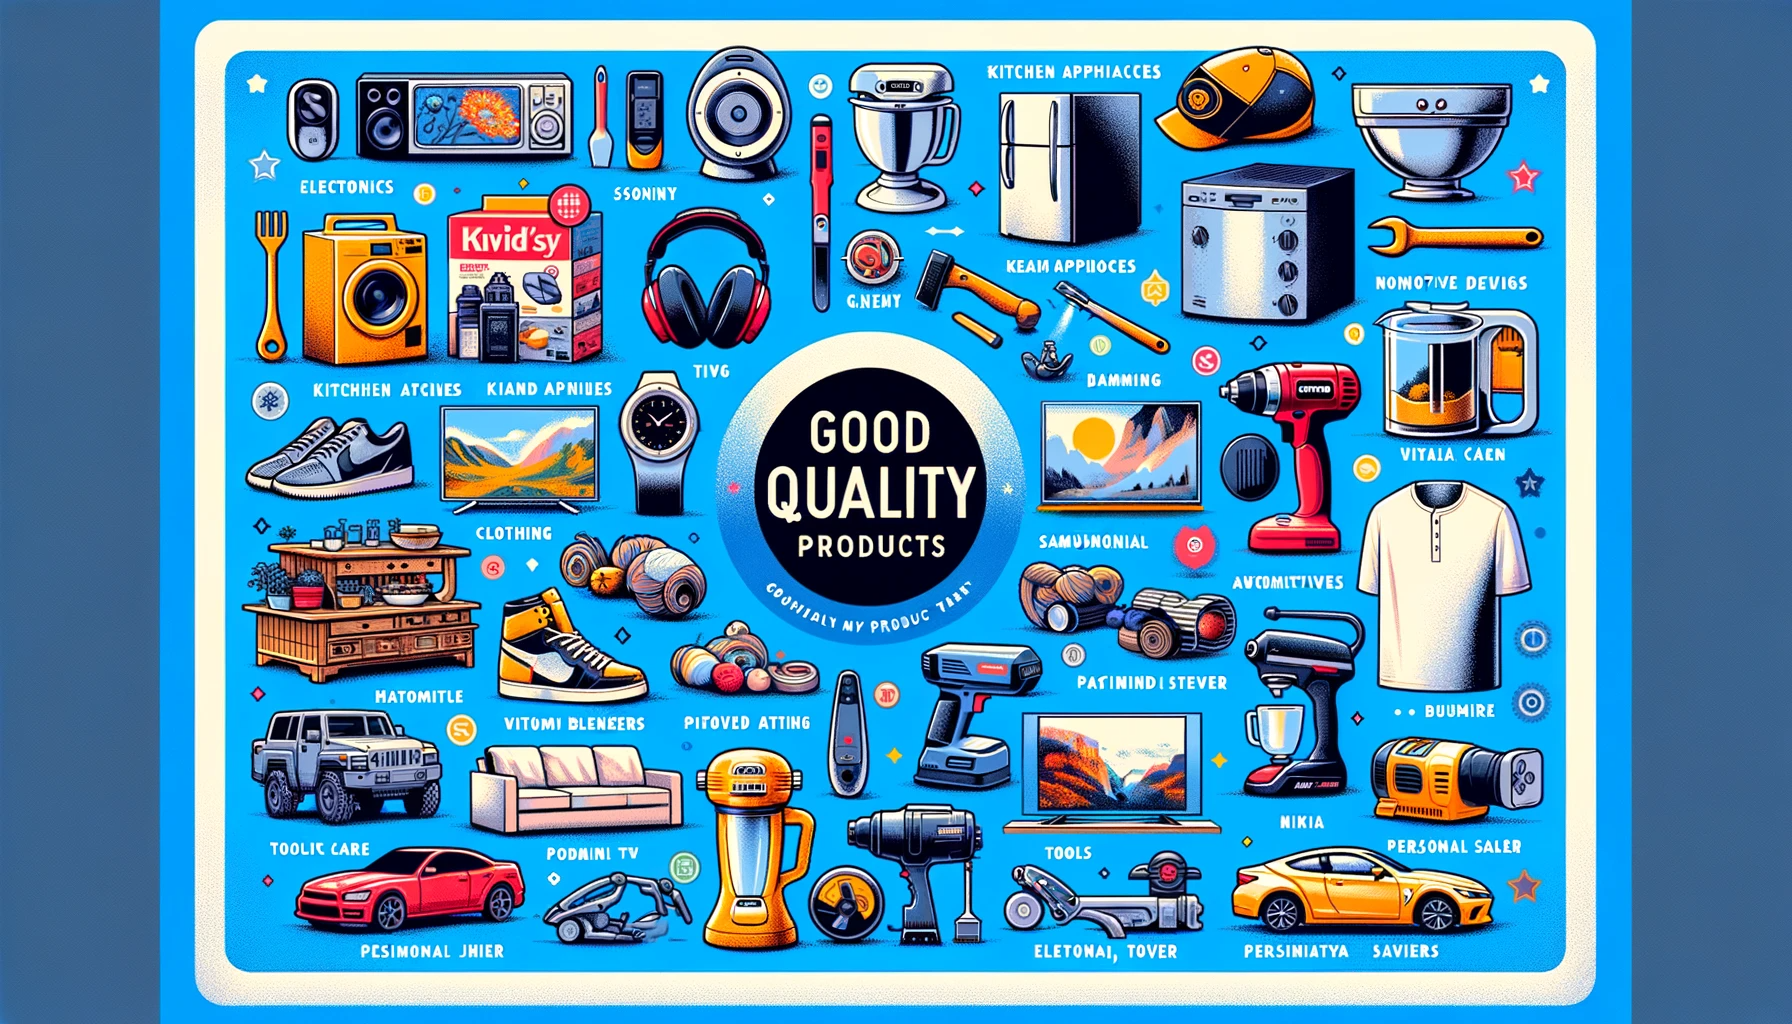 An Infographic for the good quality product